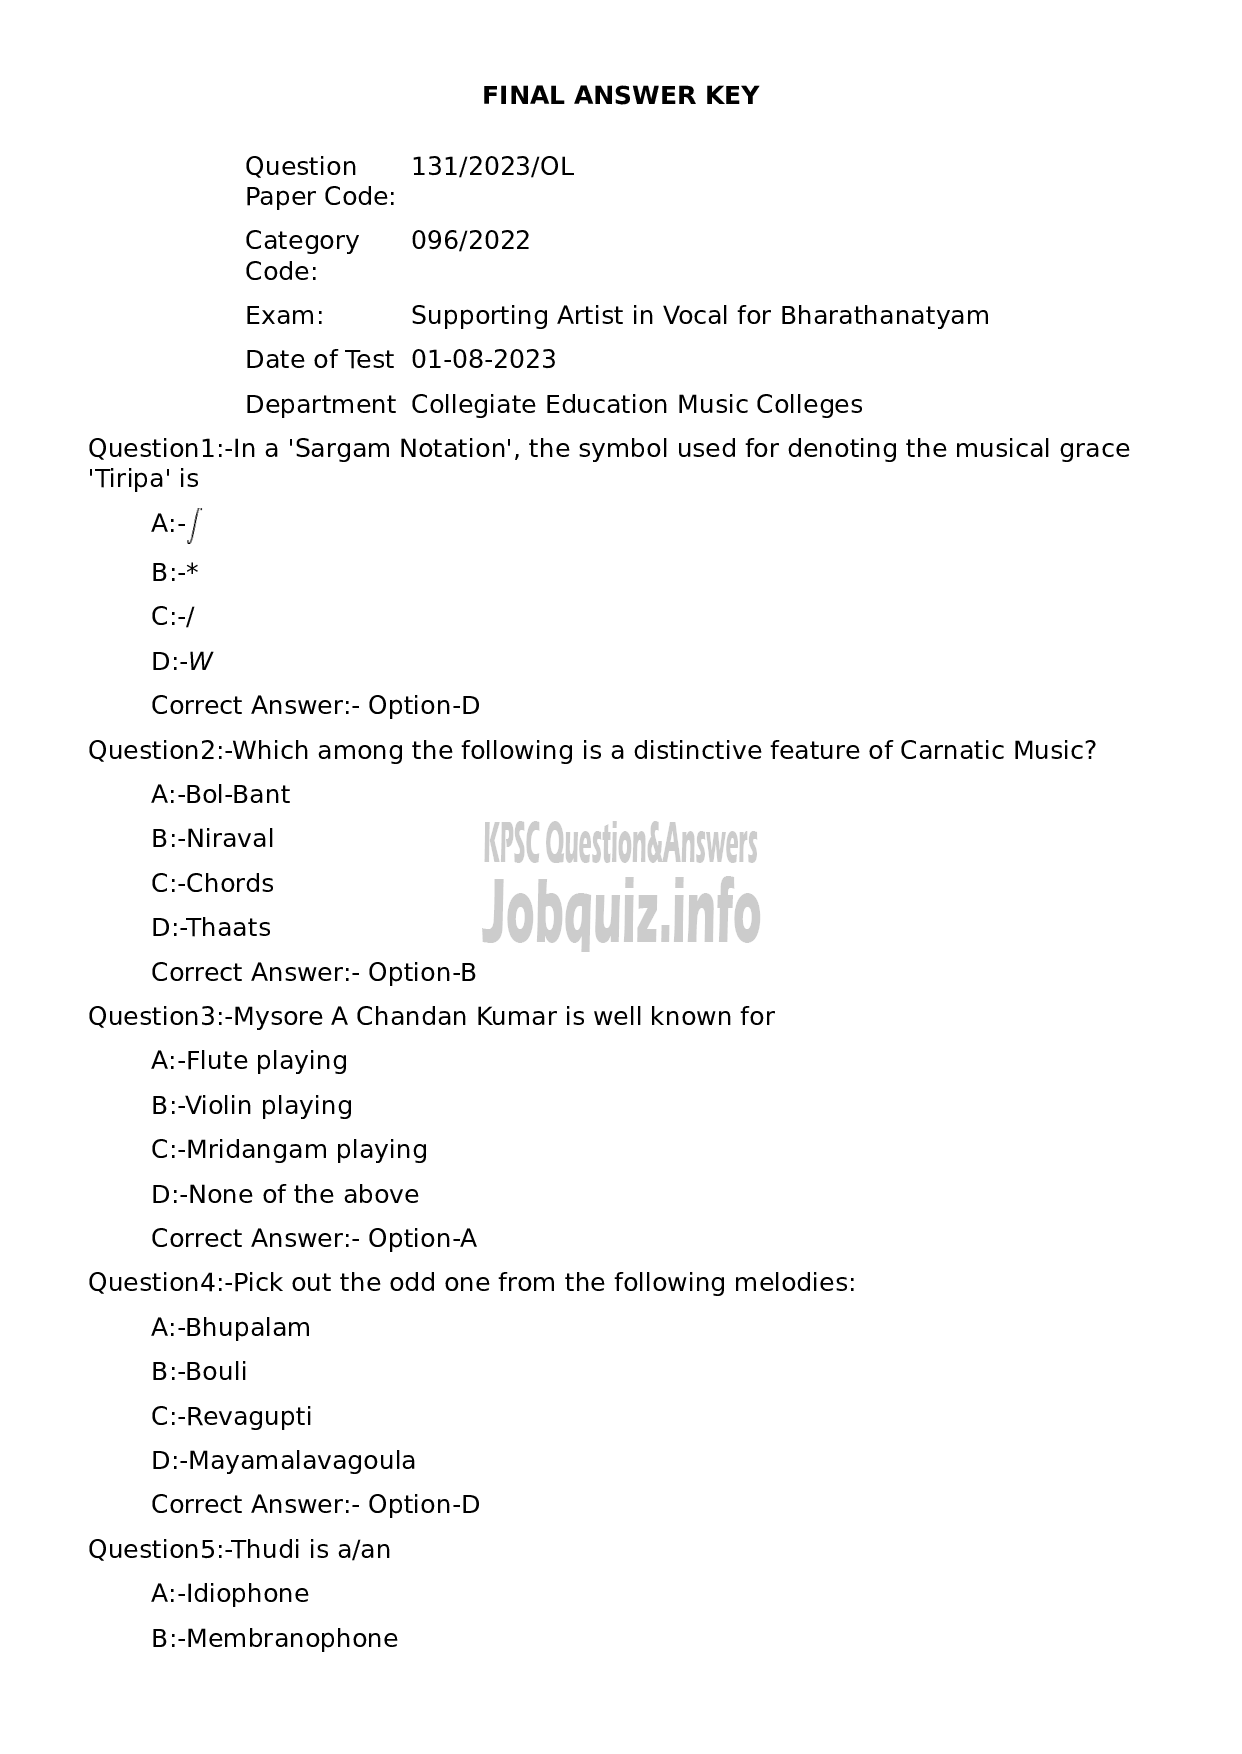 Kerala PSC Question Paper - Supporting Artist in Vocal for Bharathanatyam-1